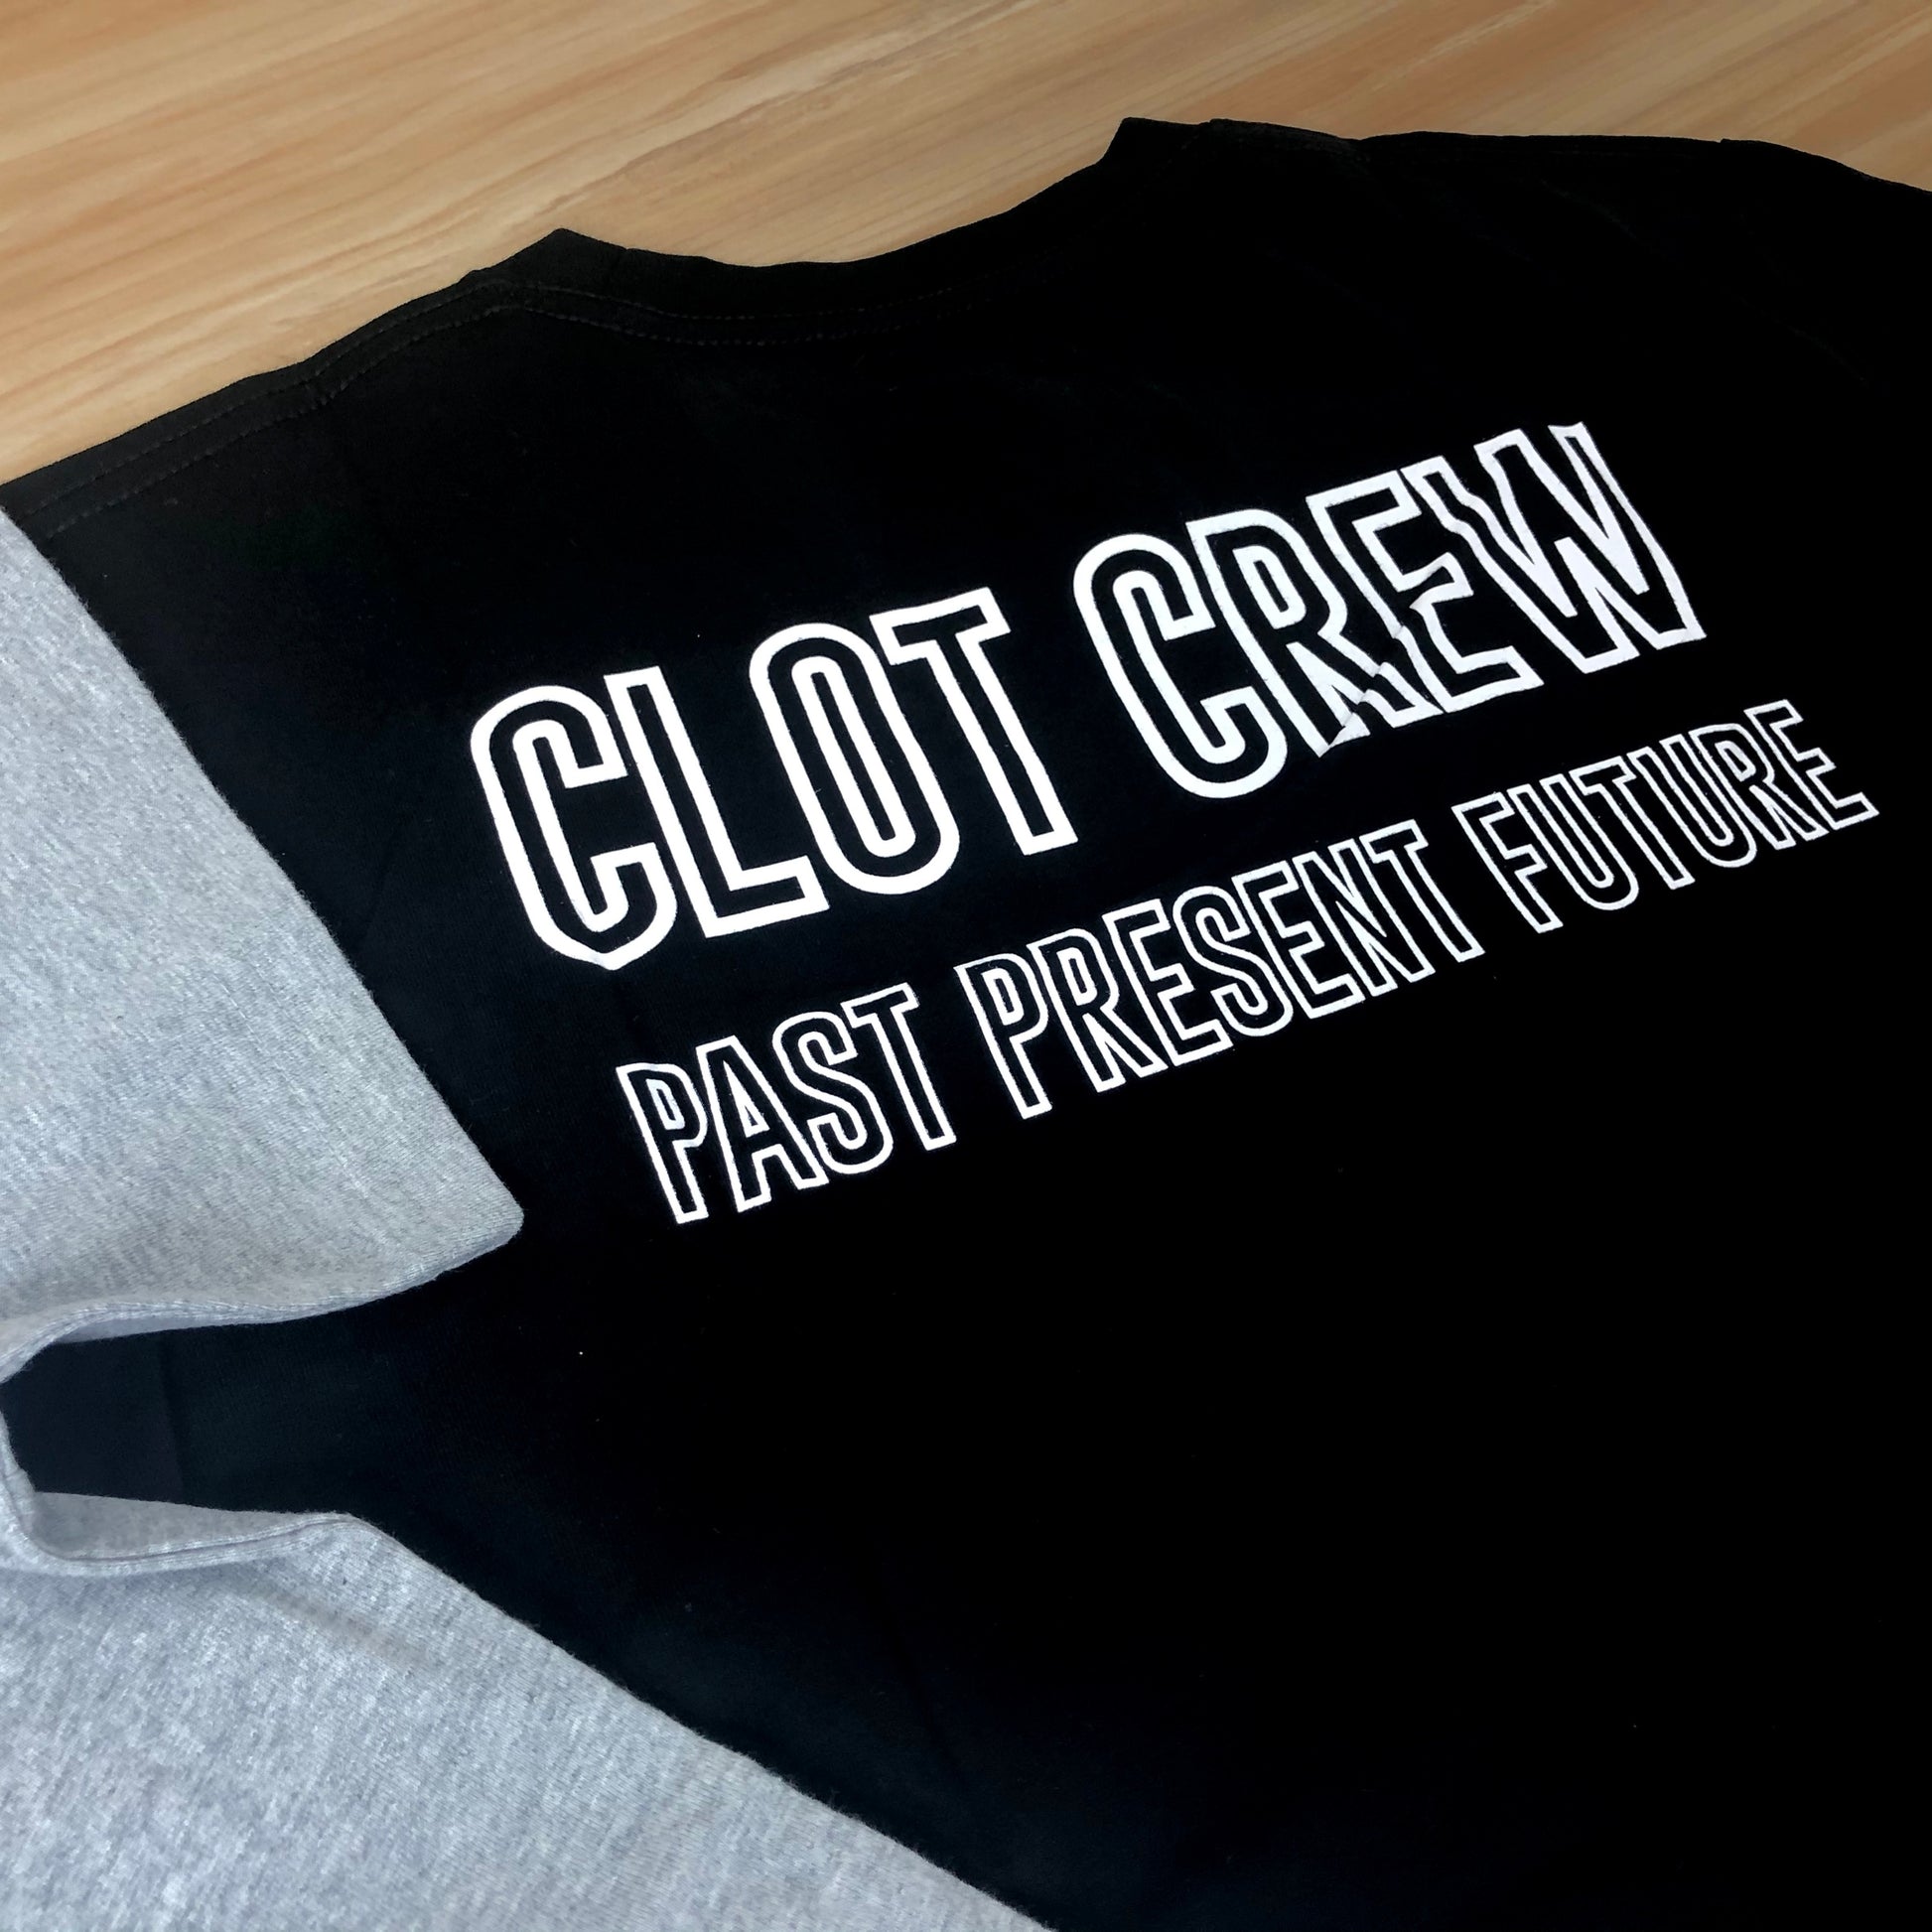 Clot 华人 Black T-Shirt - Shop Streetwear, Sneakers, Slippers and Gifts online | Malaysia - The Factory KL